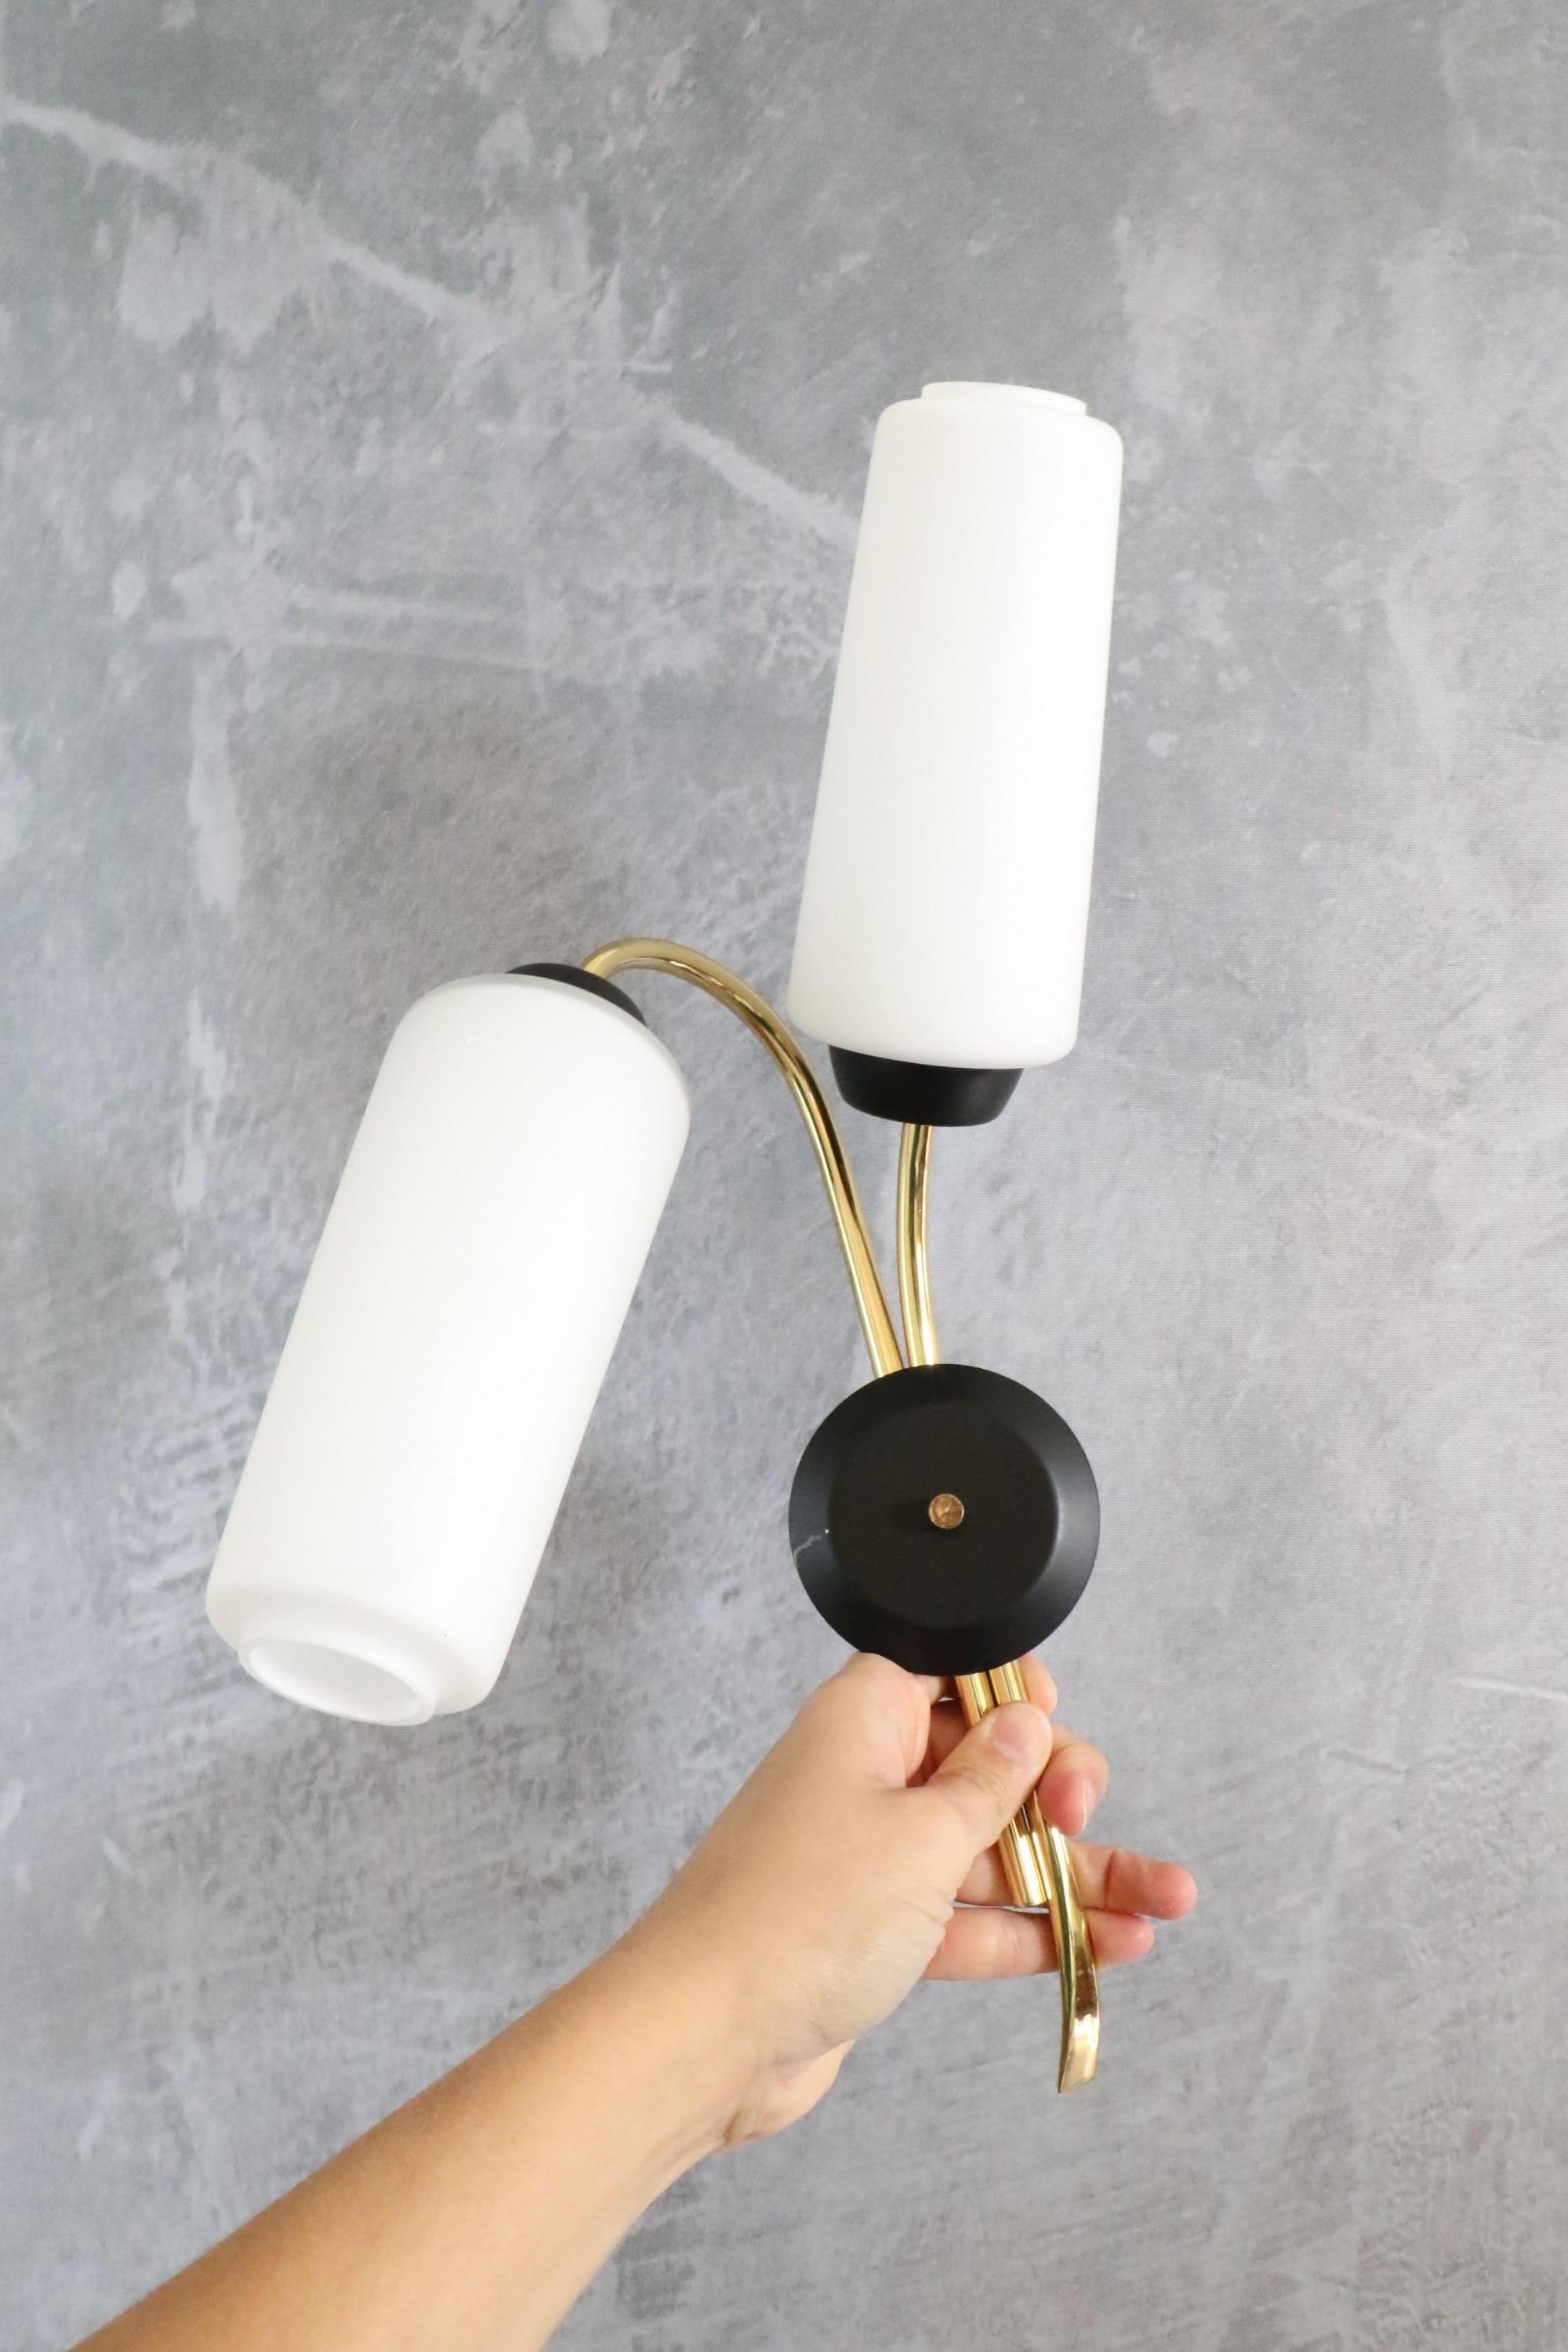 Maison Lunel, Pair of Mid-Century Modern Wall Lights, 1950s France For Sale 1